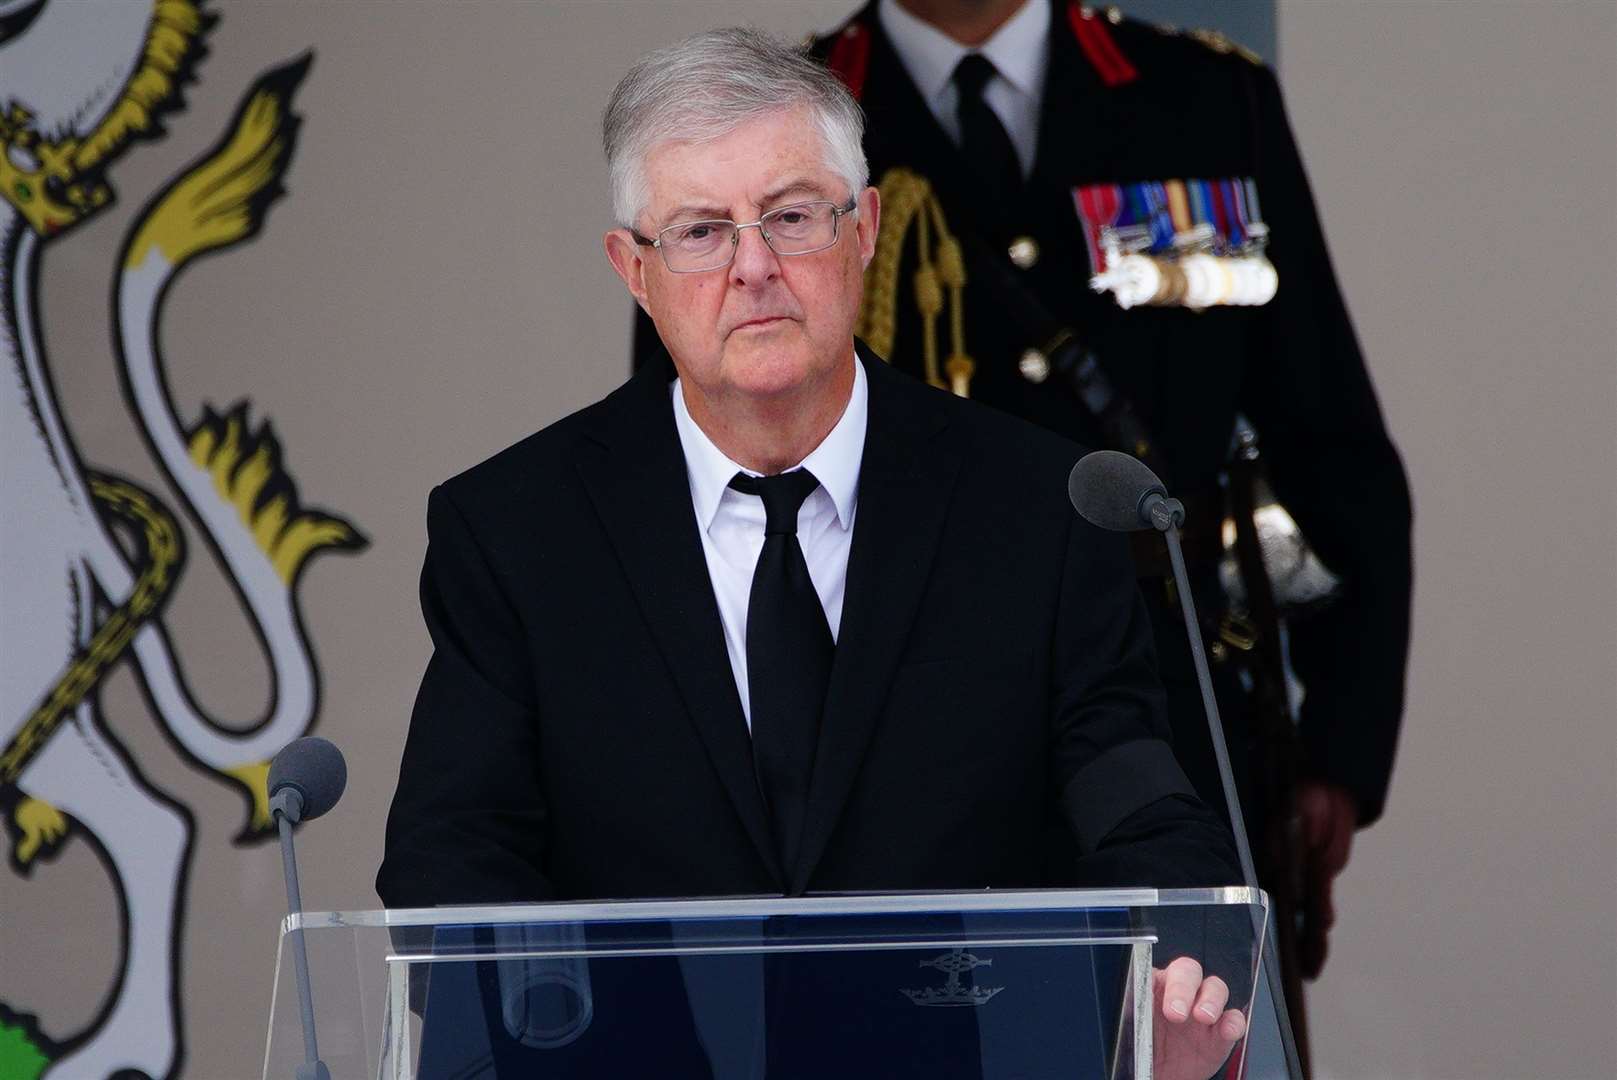 Mark Drakeford during an accession proclamation ceremony at Cardiff Castle (Ben Birchall/PA)